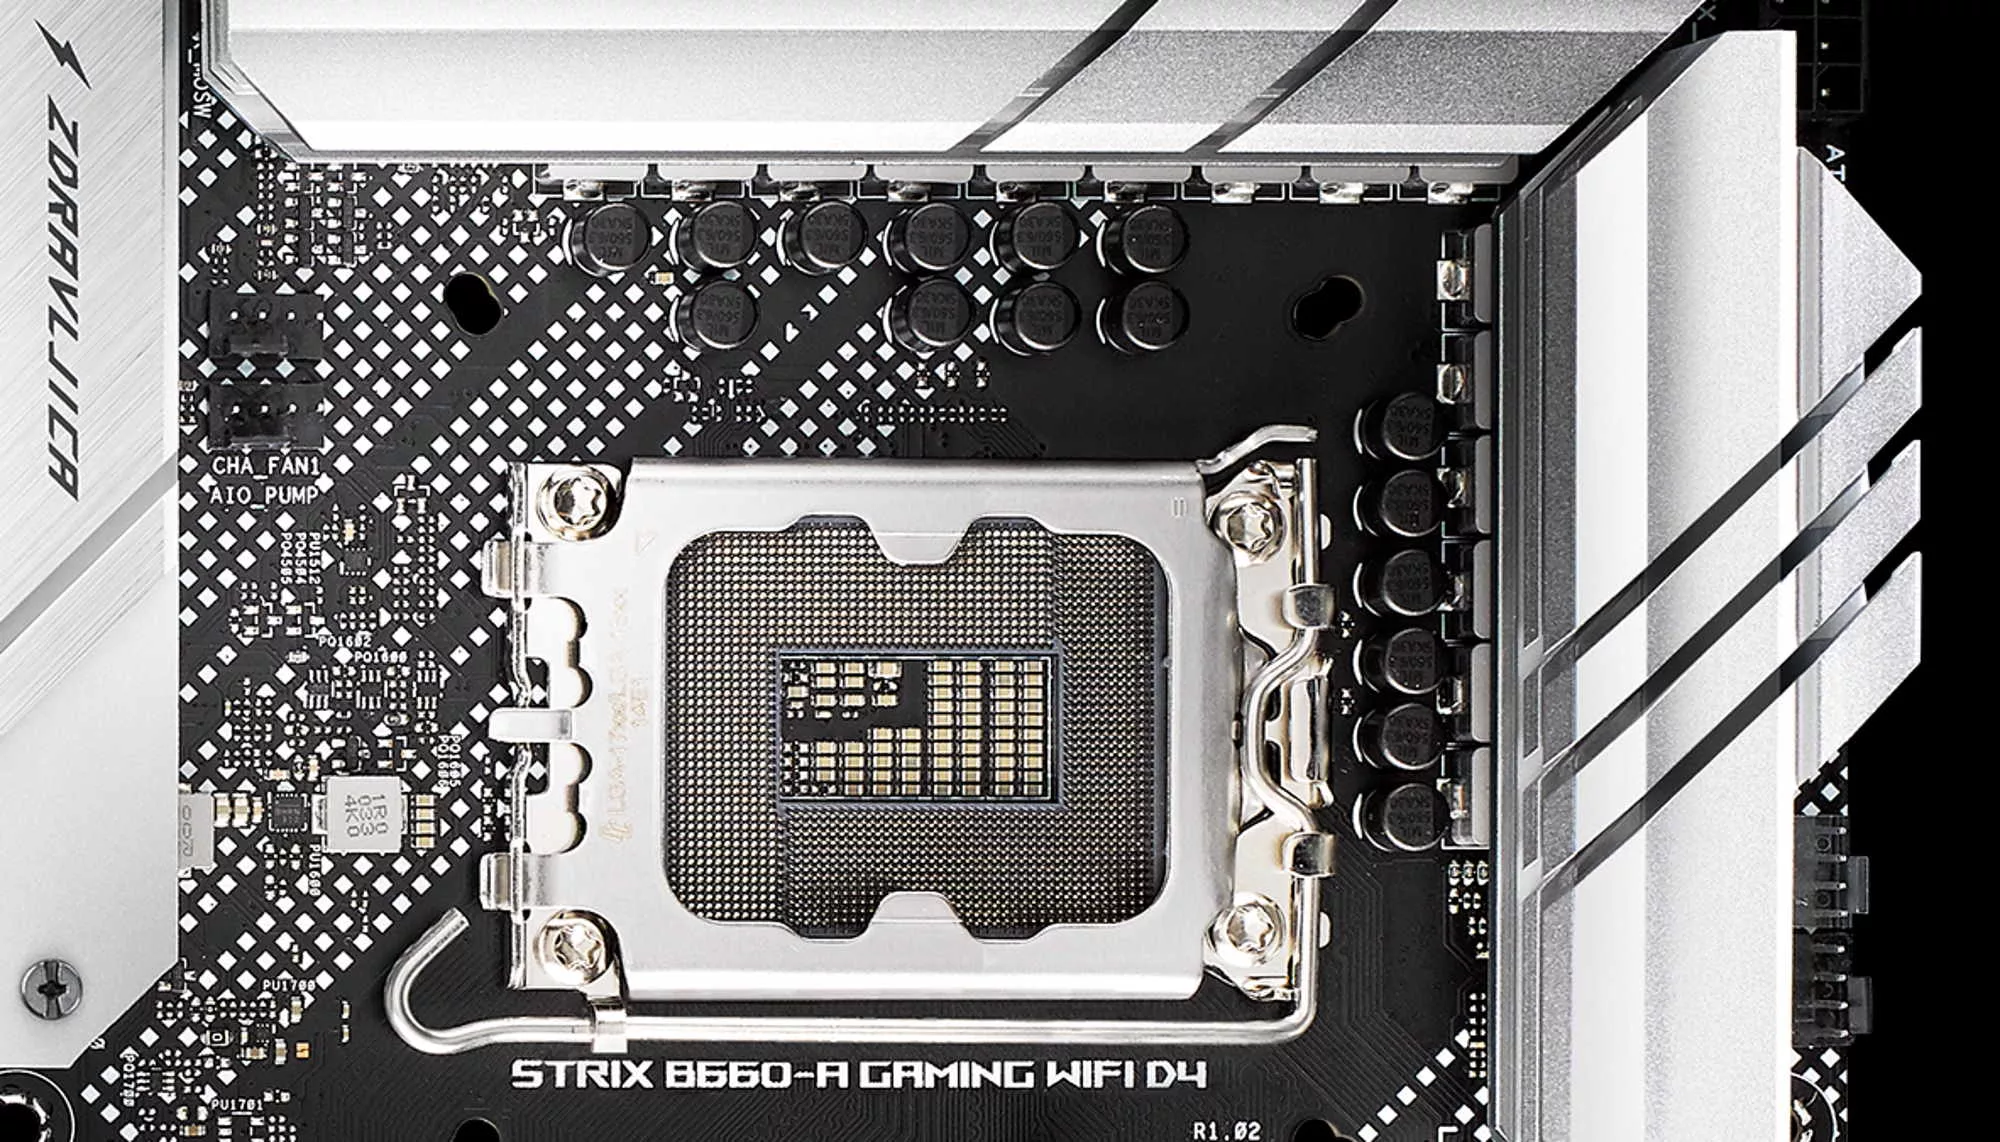 Closeup of the CPU socket of the ROG Strix B660-A Gaming WiFi D4 motherboard.